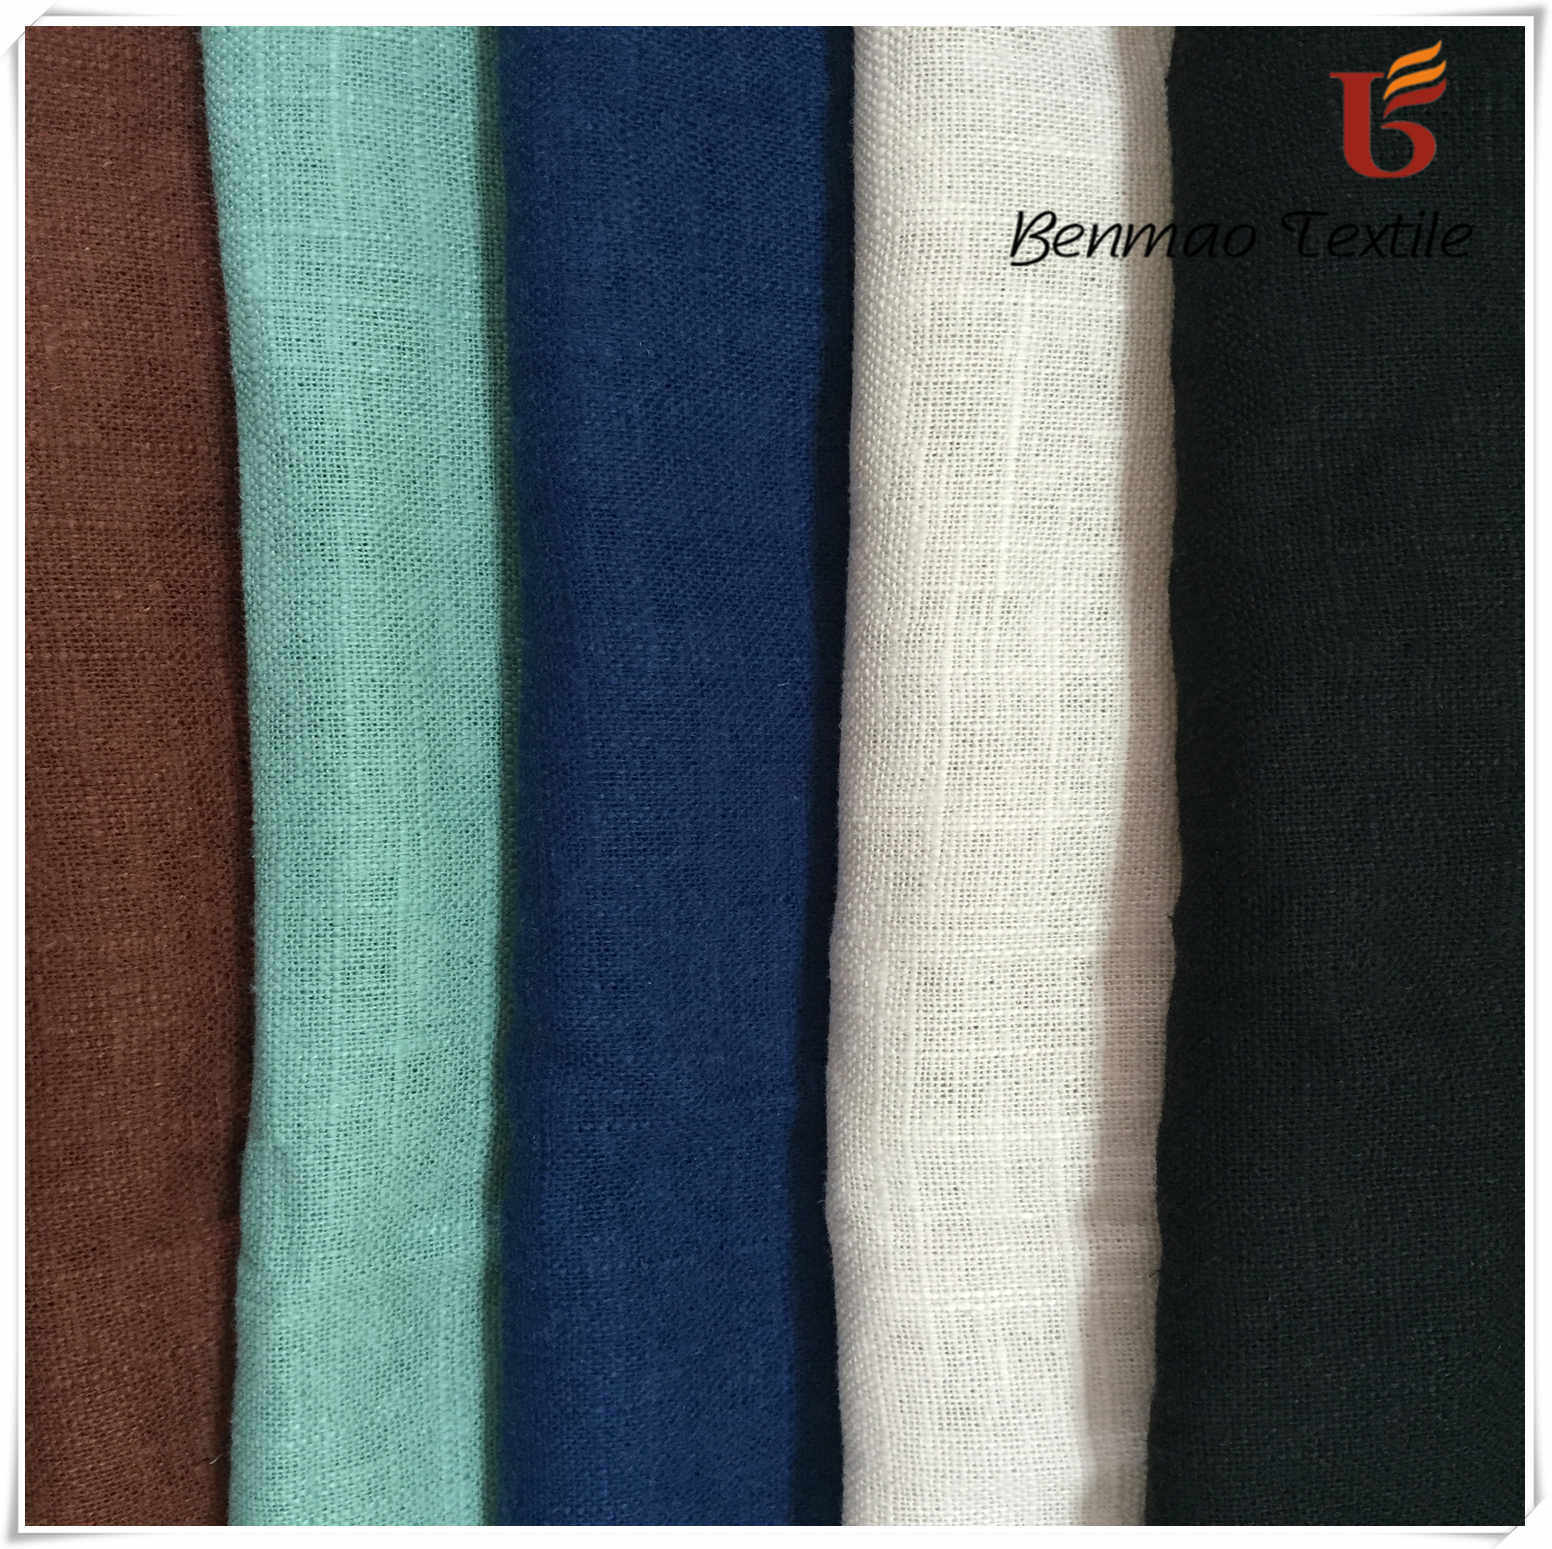 Blended Rayon&Linen Fabric for Grments/Viscose Linen Fabric